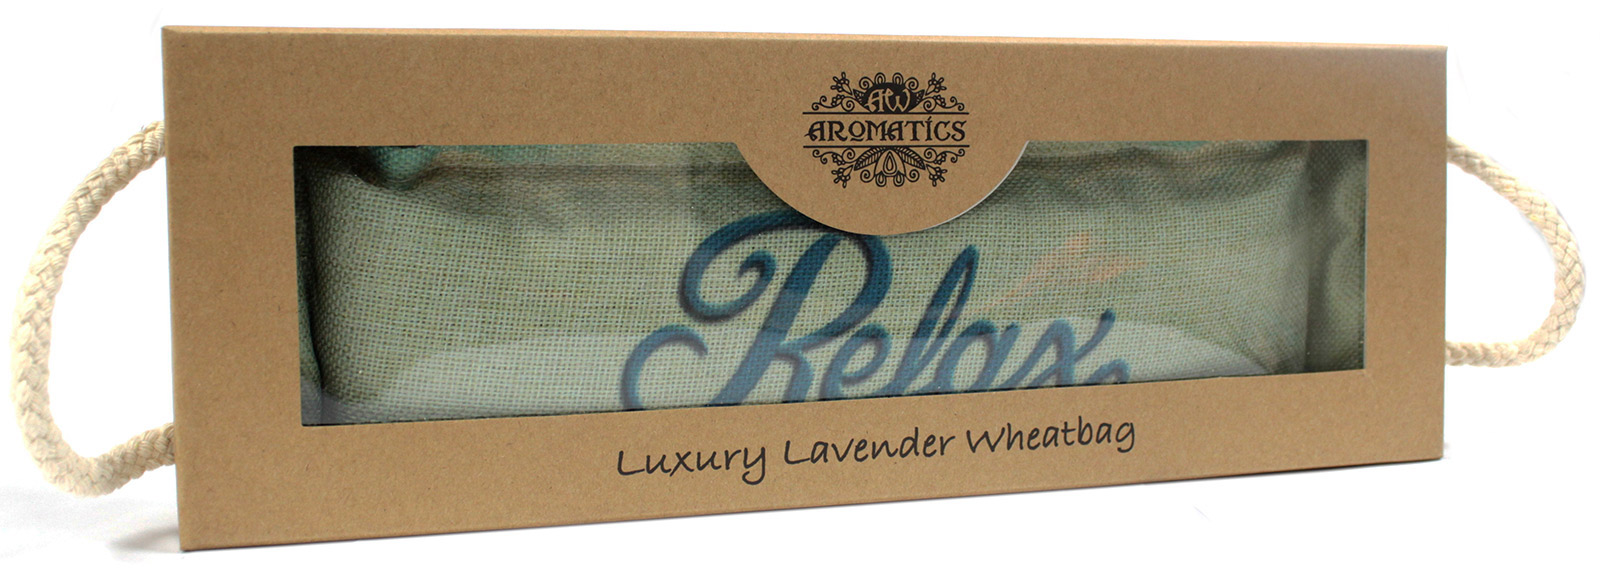 Luxury Lavender Wheat Bag in Gift Box - Blue Sky RELAX